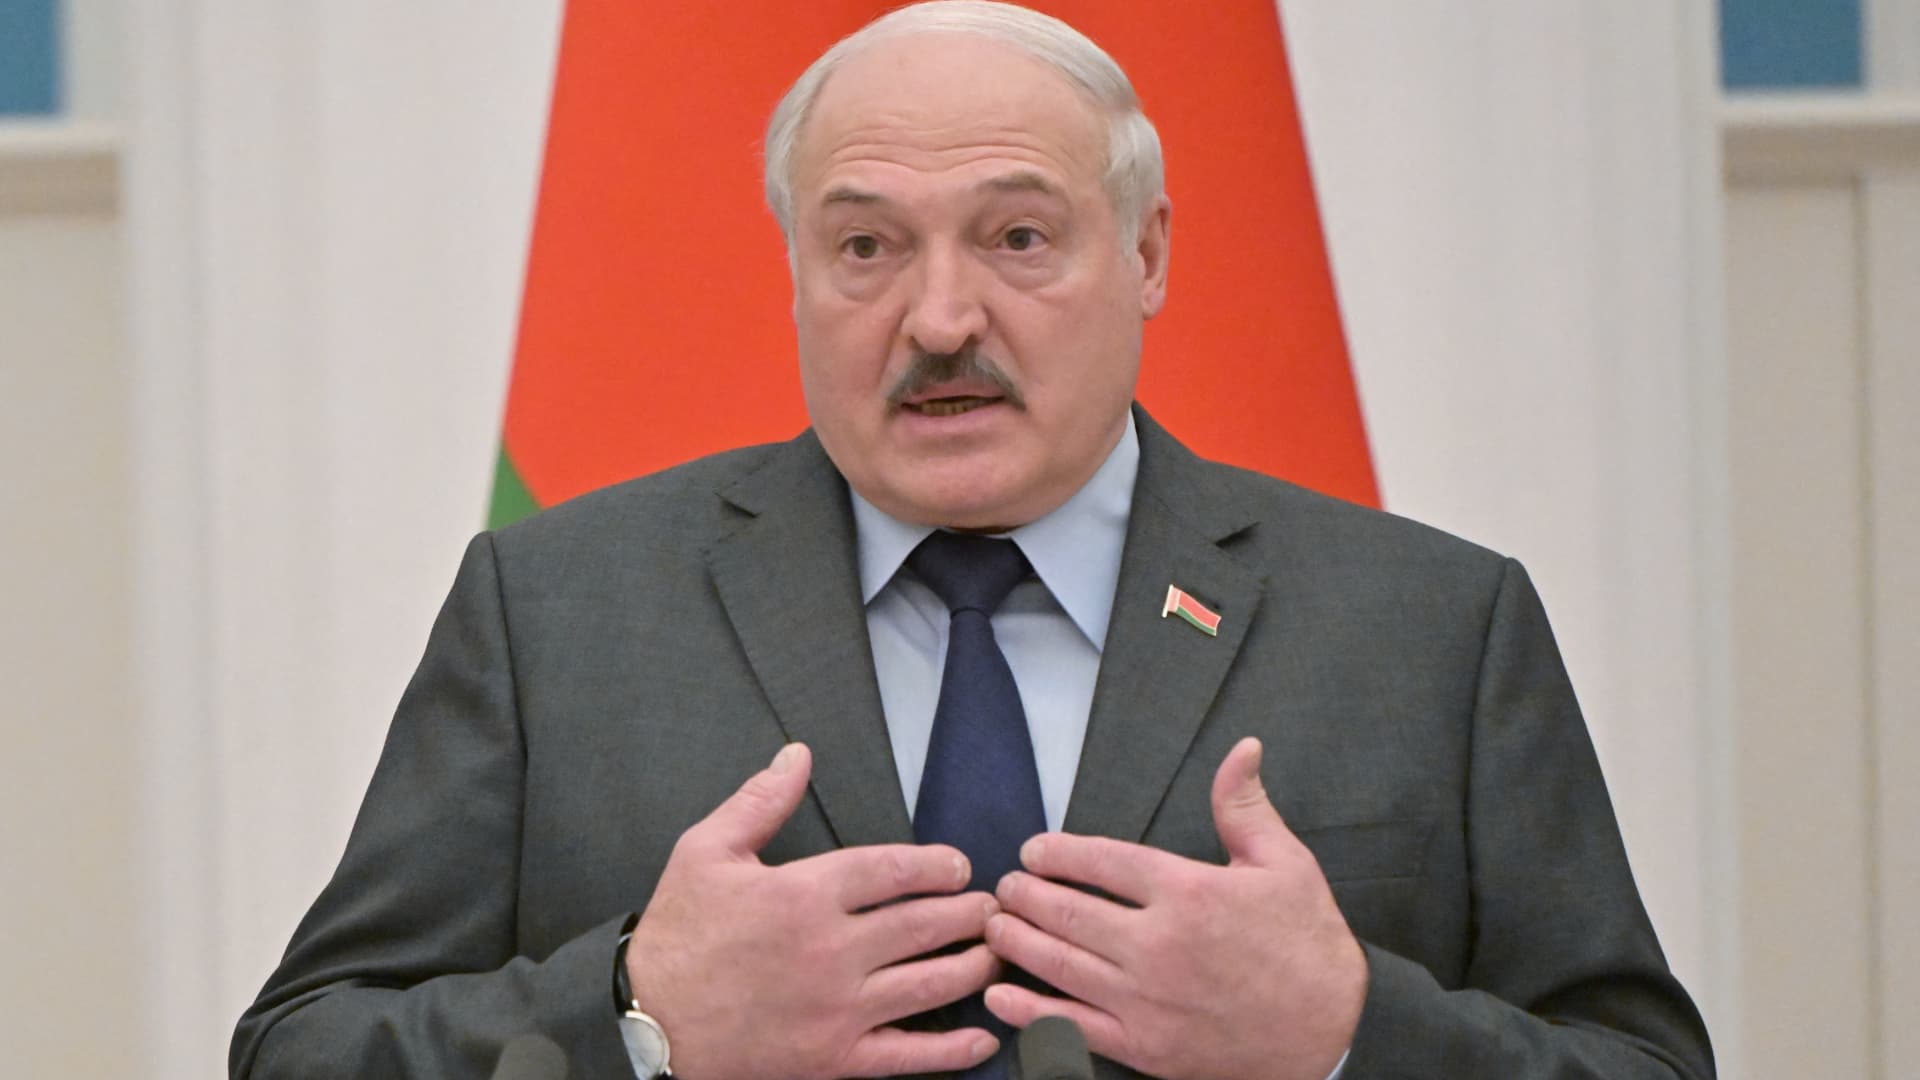 Belarusian President Alexander Lukashenko speaks during a joint news conference with Russian President Vladimir Putin in Moscow, Russia February 18, 2022.